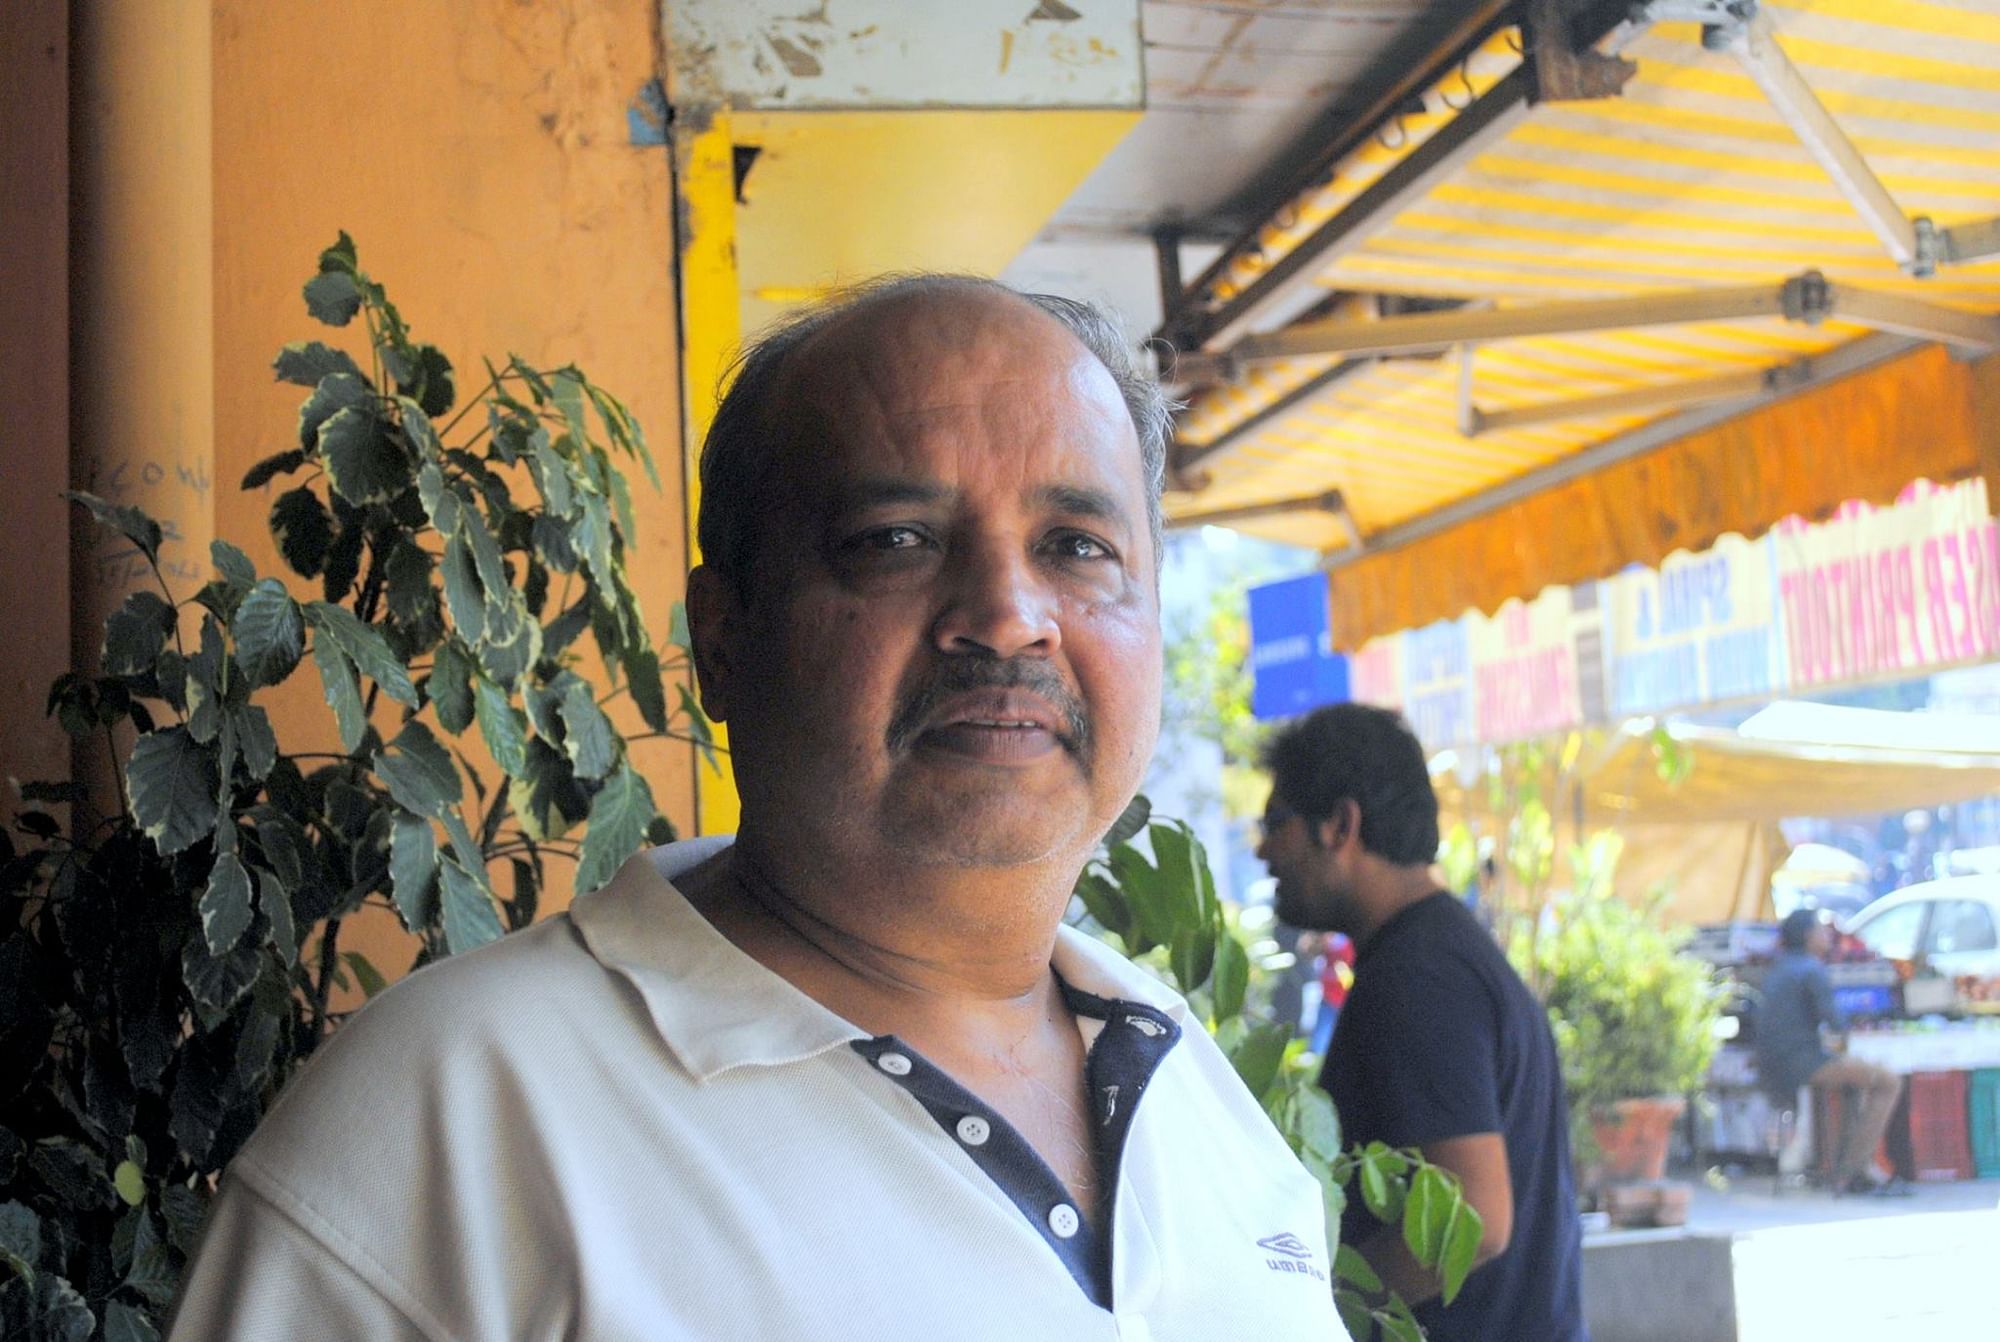 Leopold Cafe owner recounts 26/11 terror 